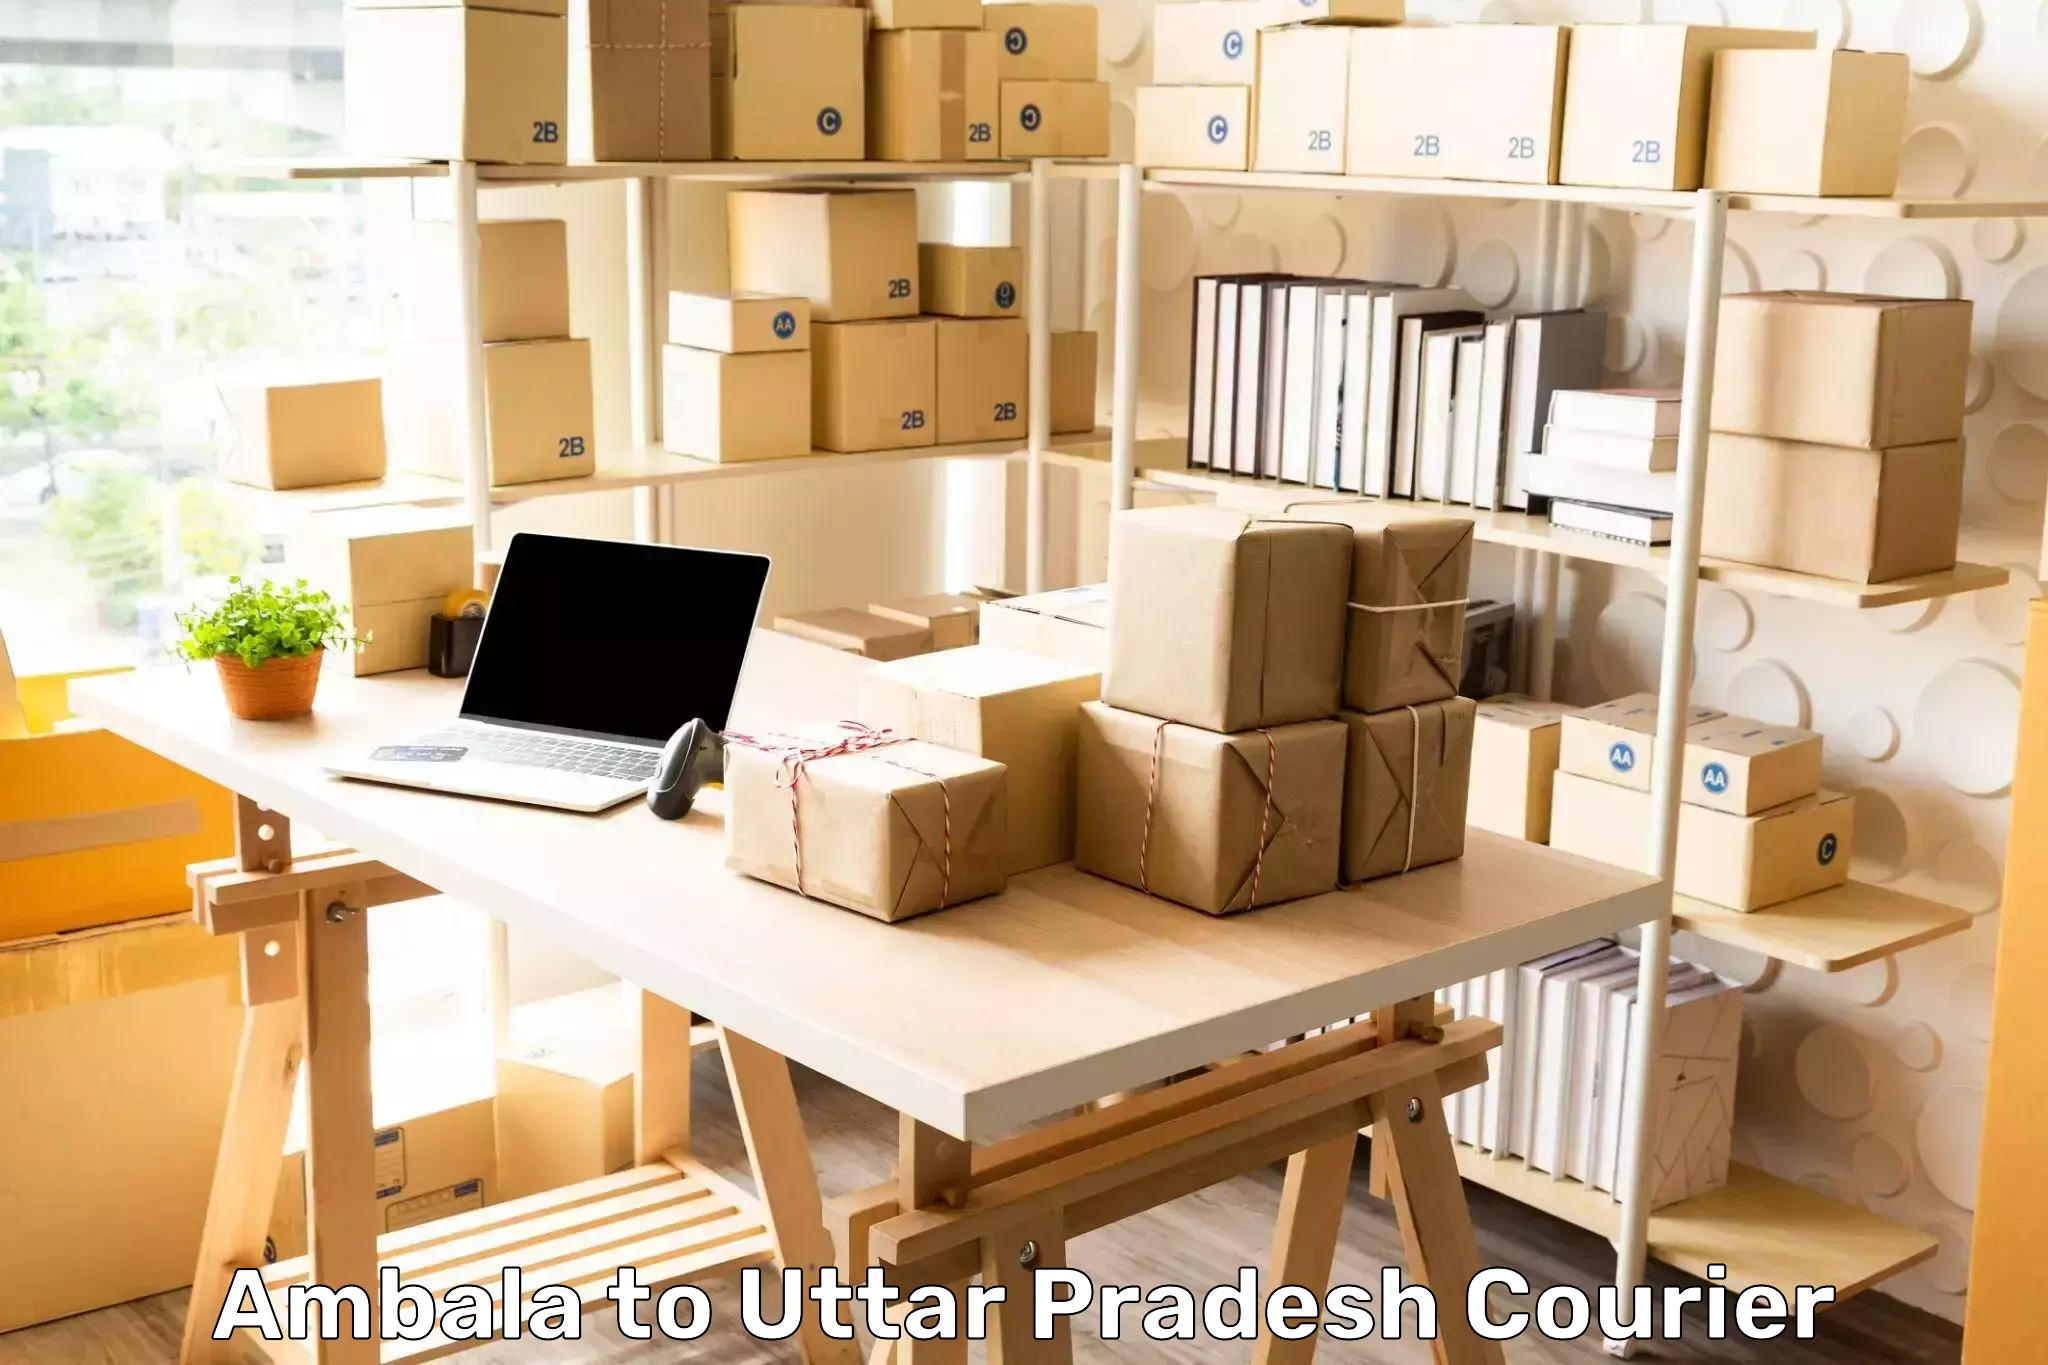 Courier dispatch services in Ambala to Rampur Maniharan